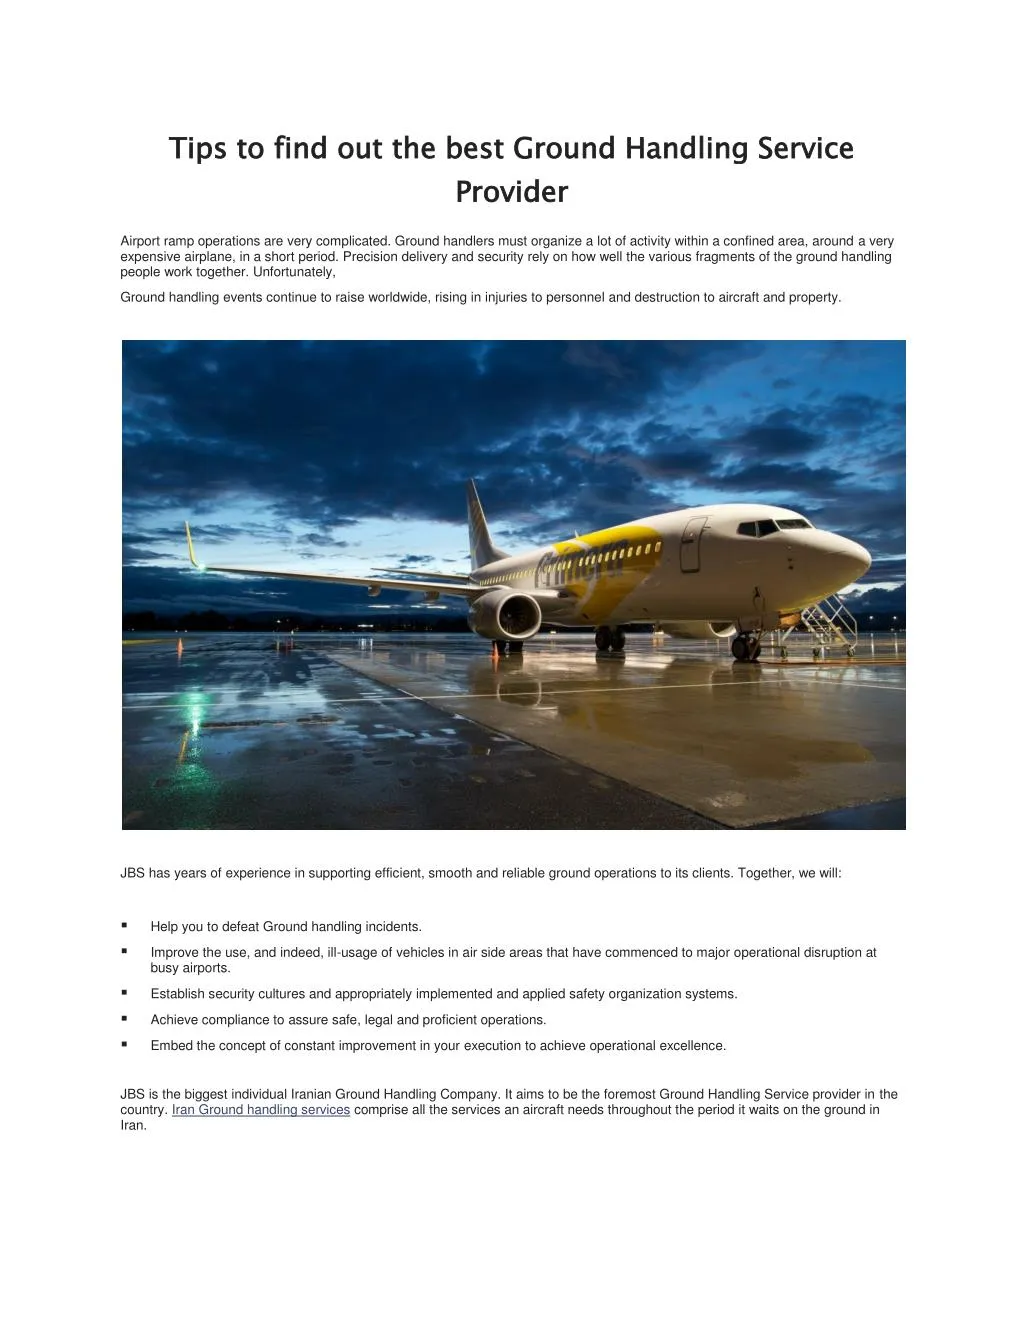 tips to find out the best ground handling service